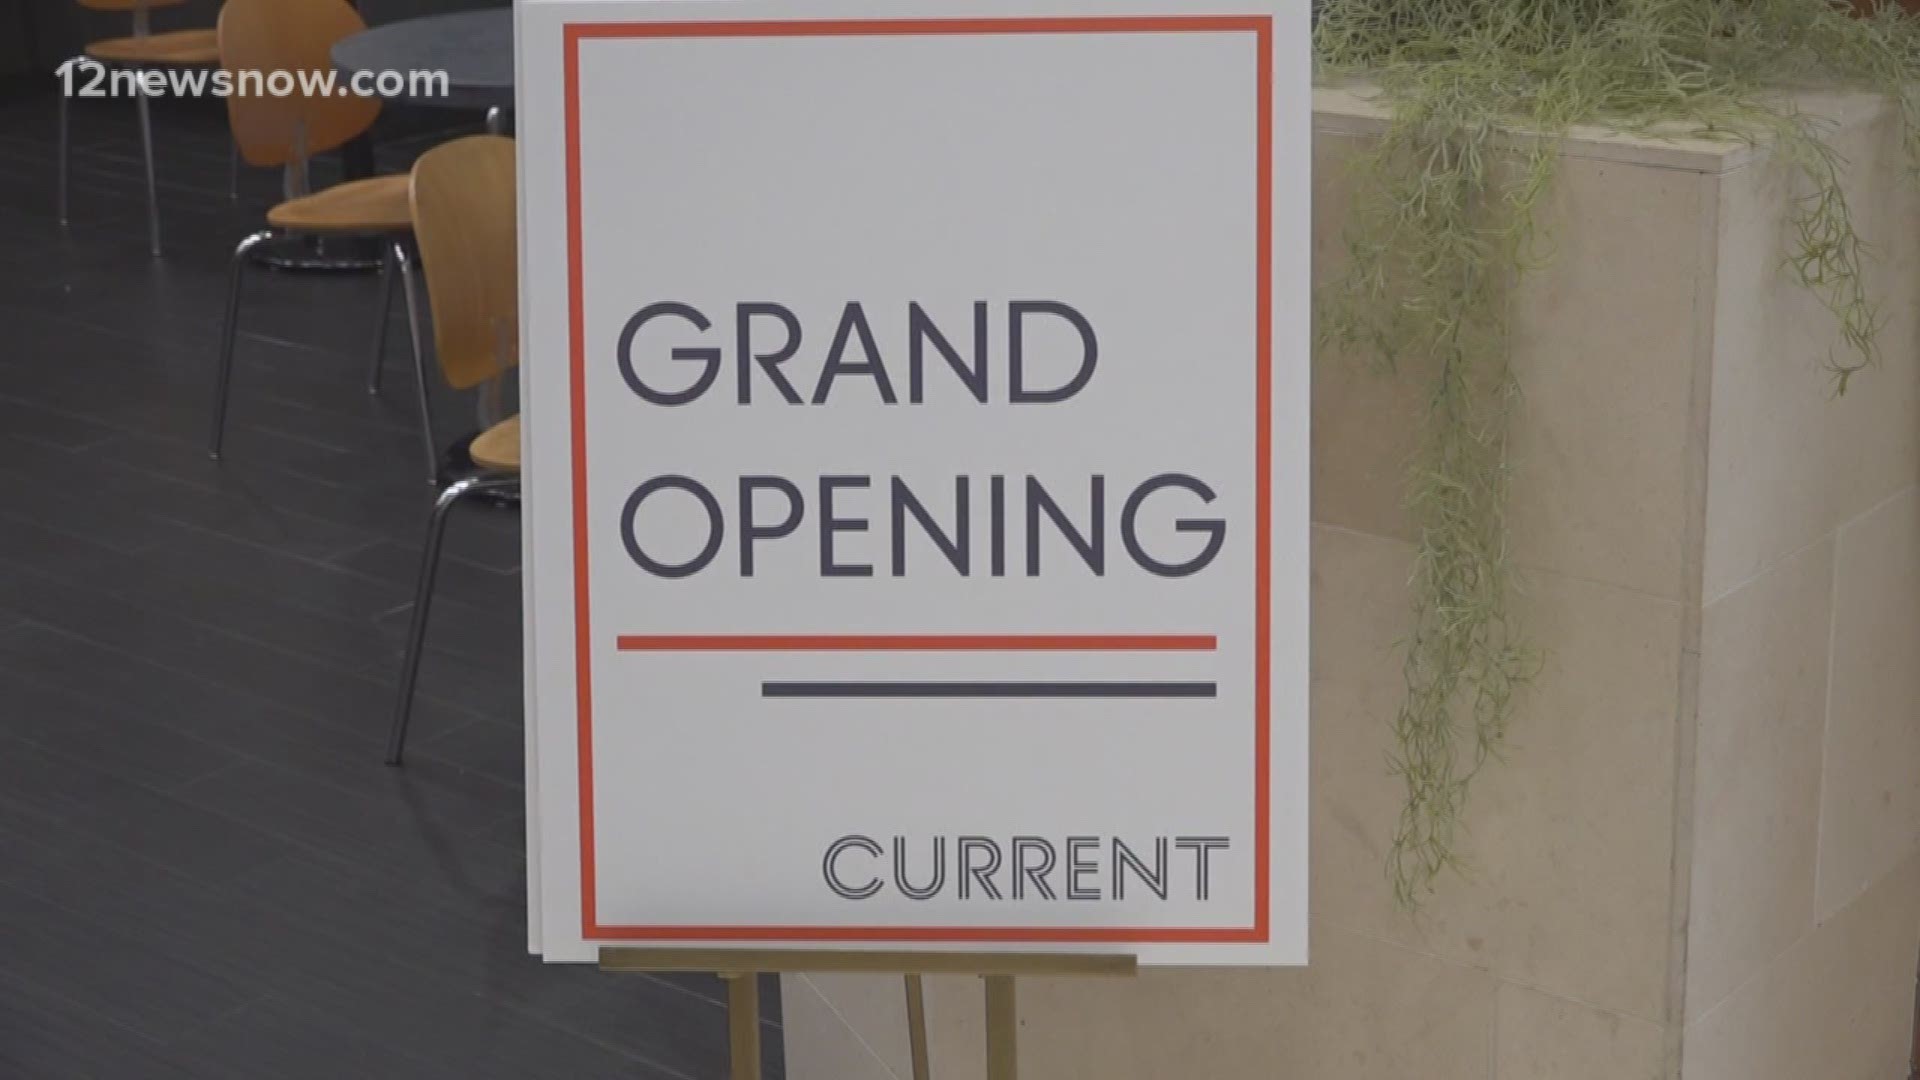 Current just had their grand opening. However, two other Southeast restaurants have temporarily closed their doors.